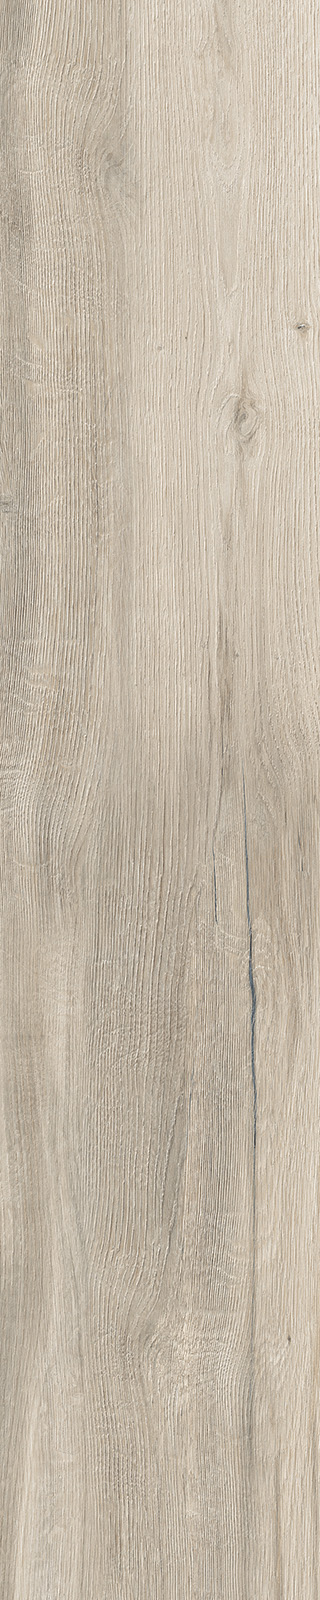 Timber Lux Greige